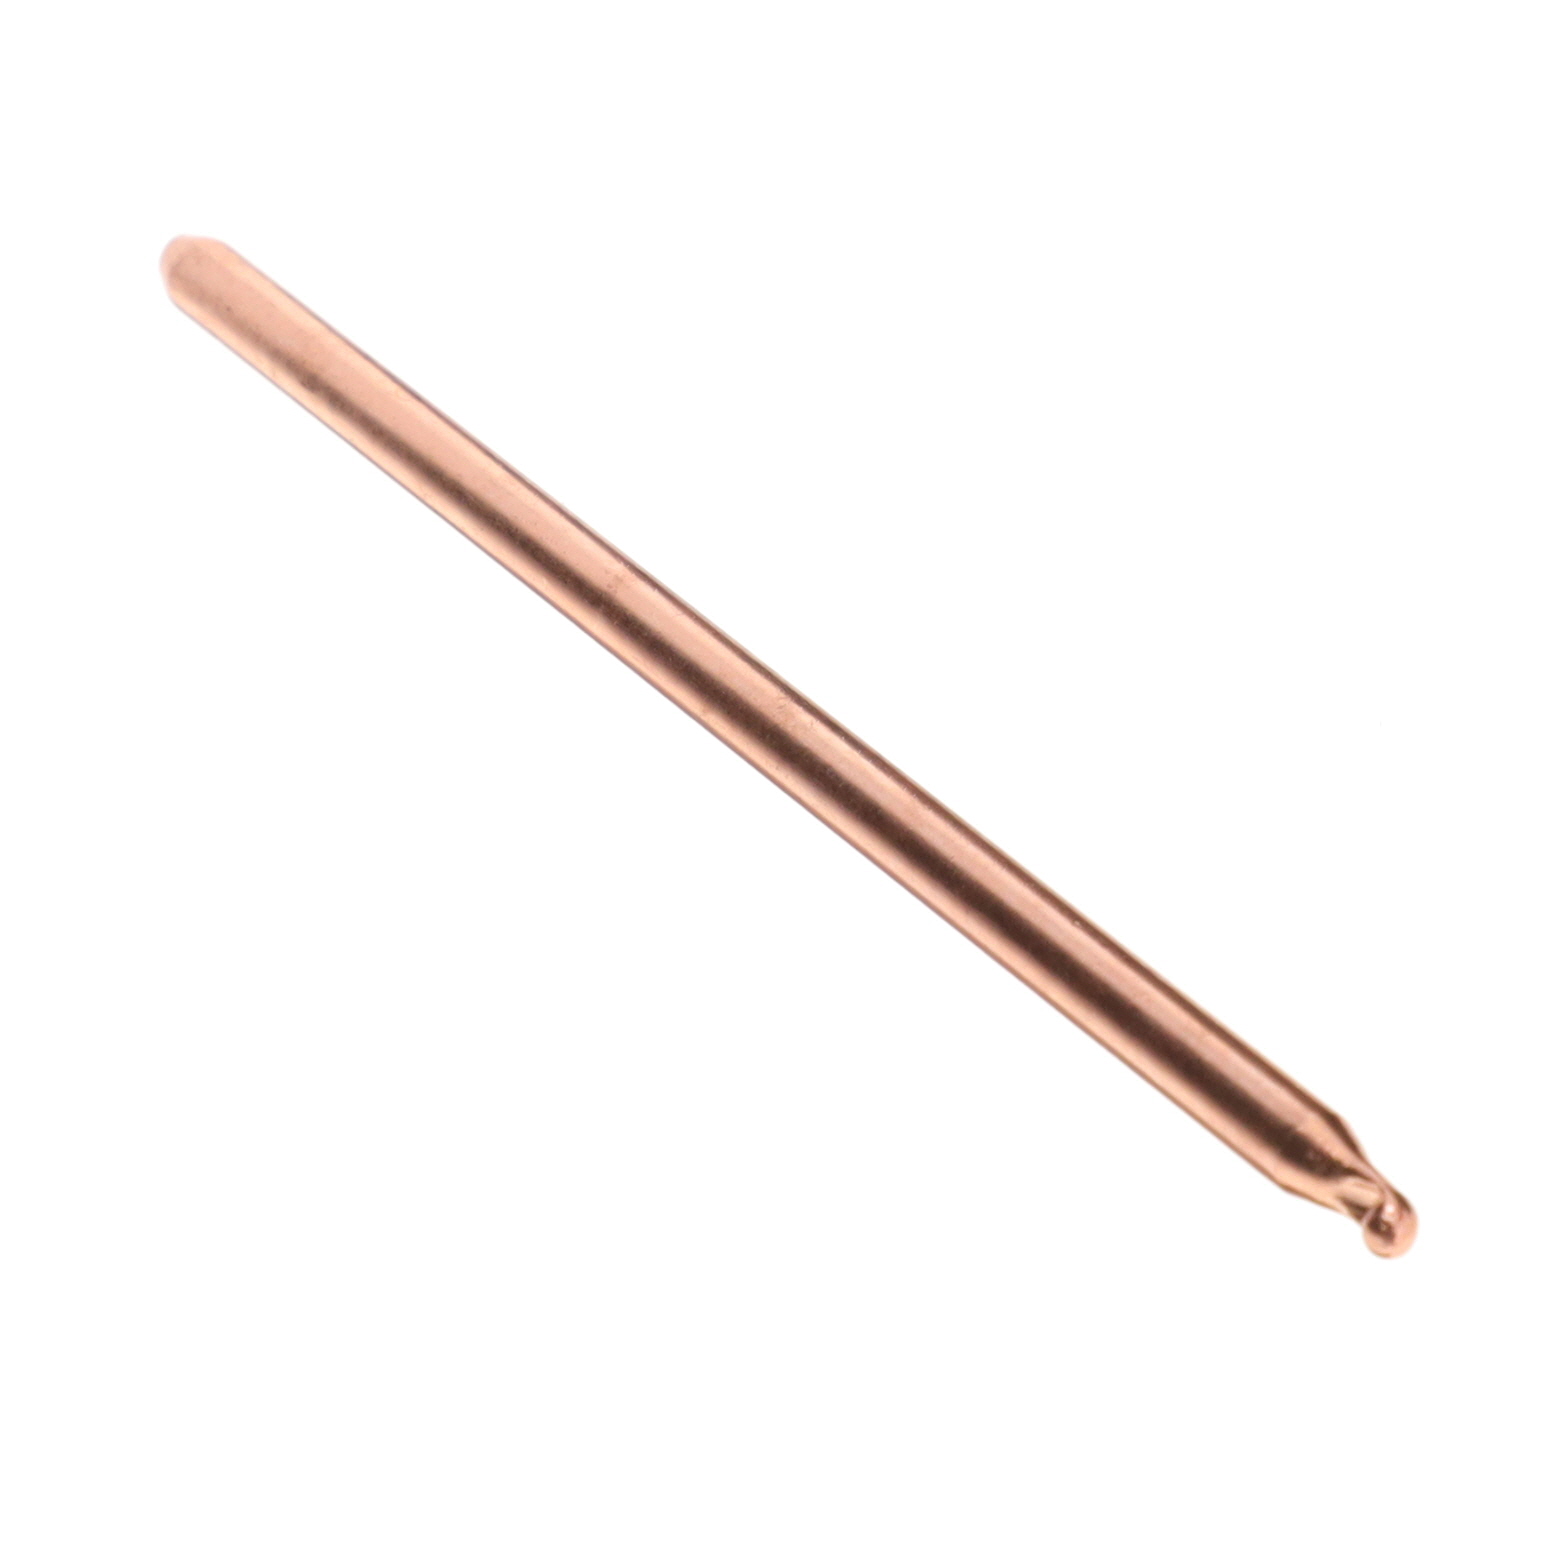 【HP-CWS-R04-100-N】COPPER-WATER HEAT PIPE, ROUND, D